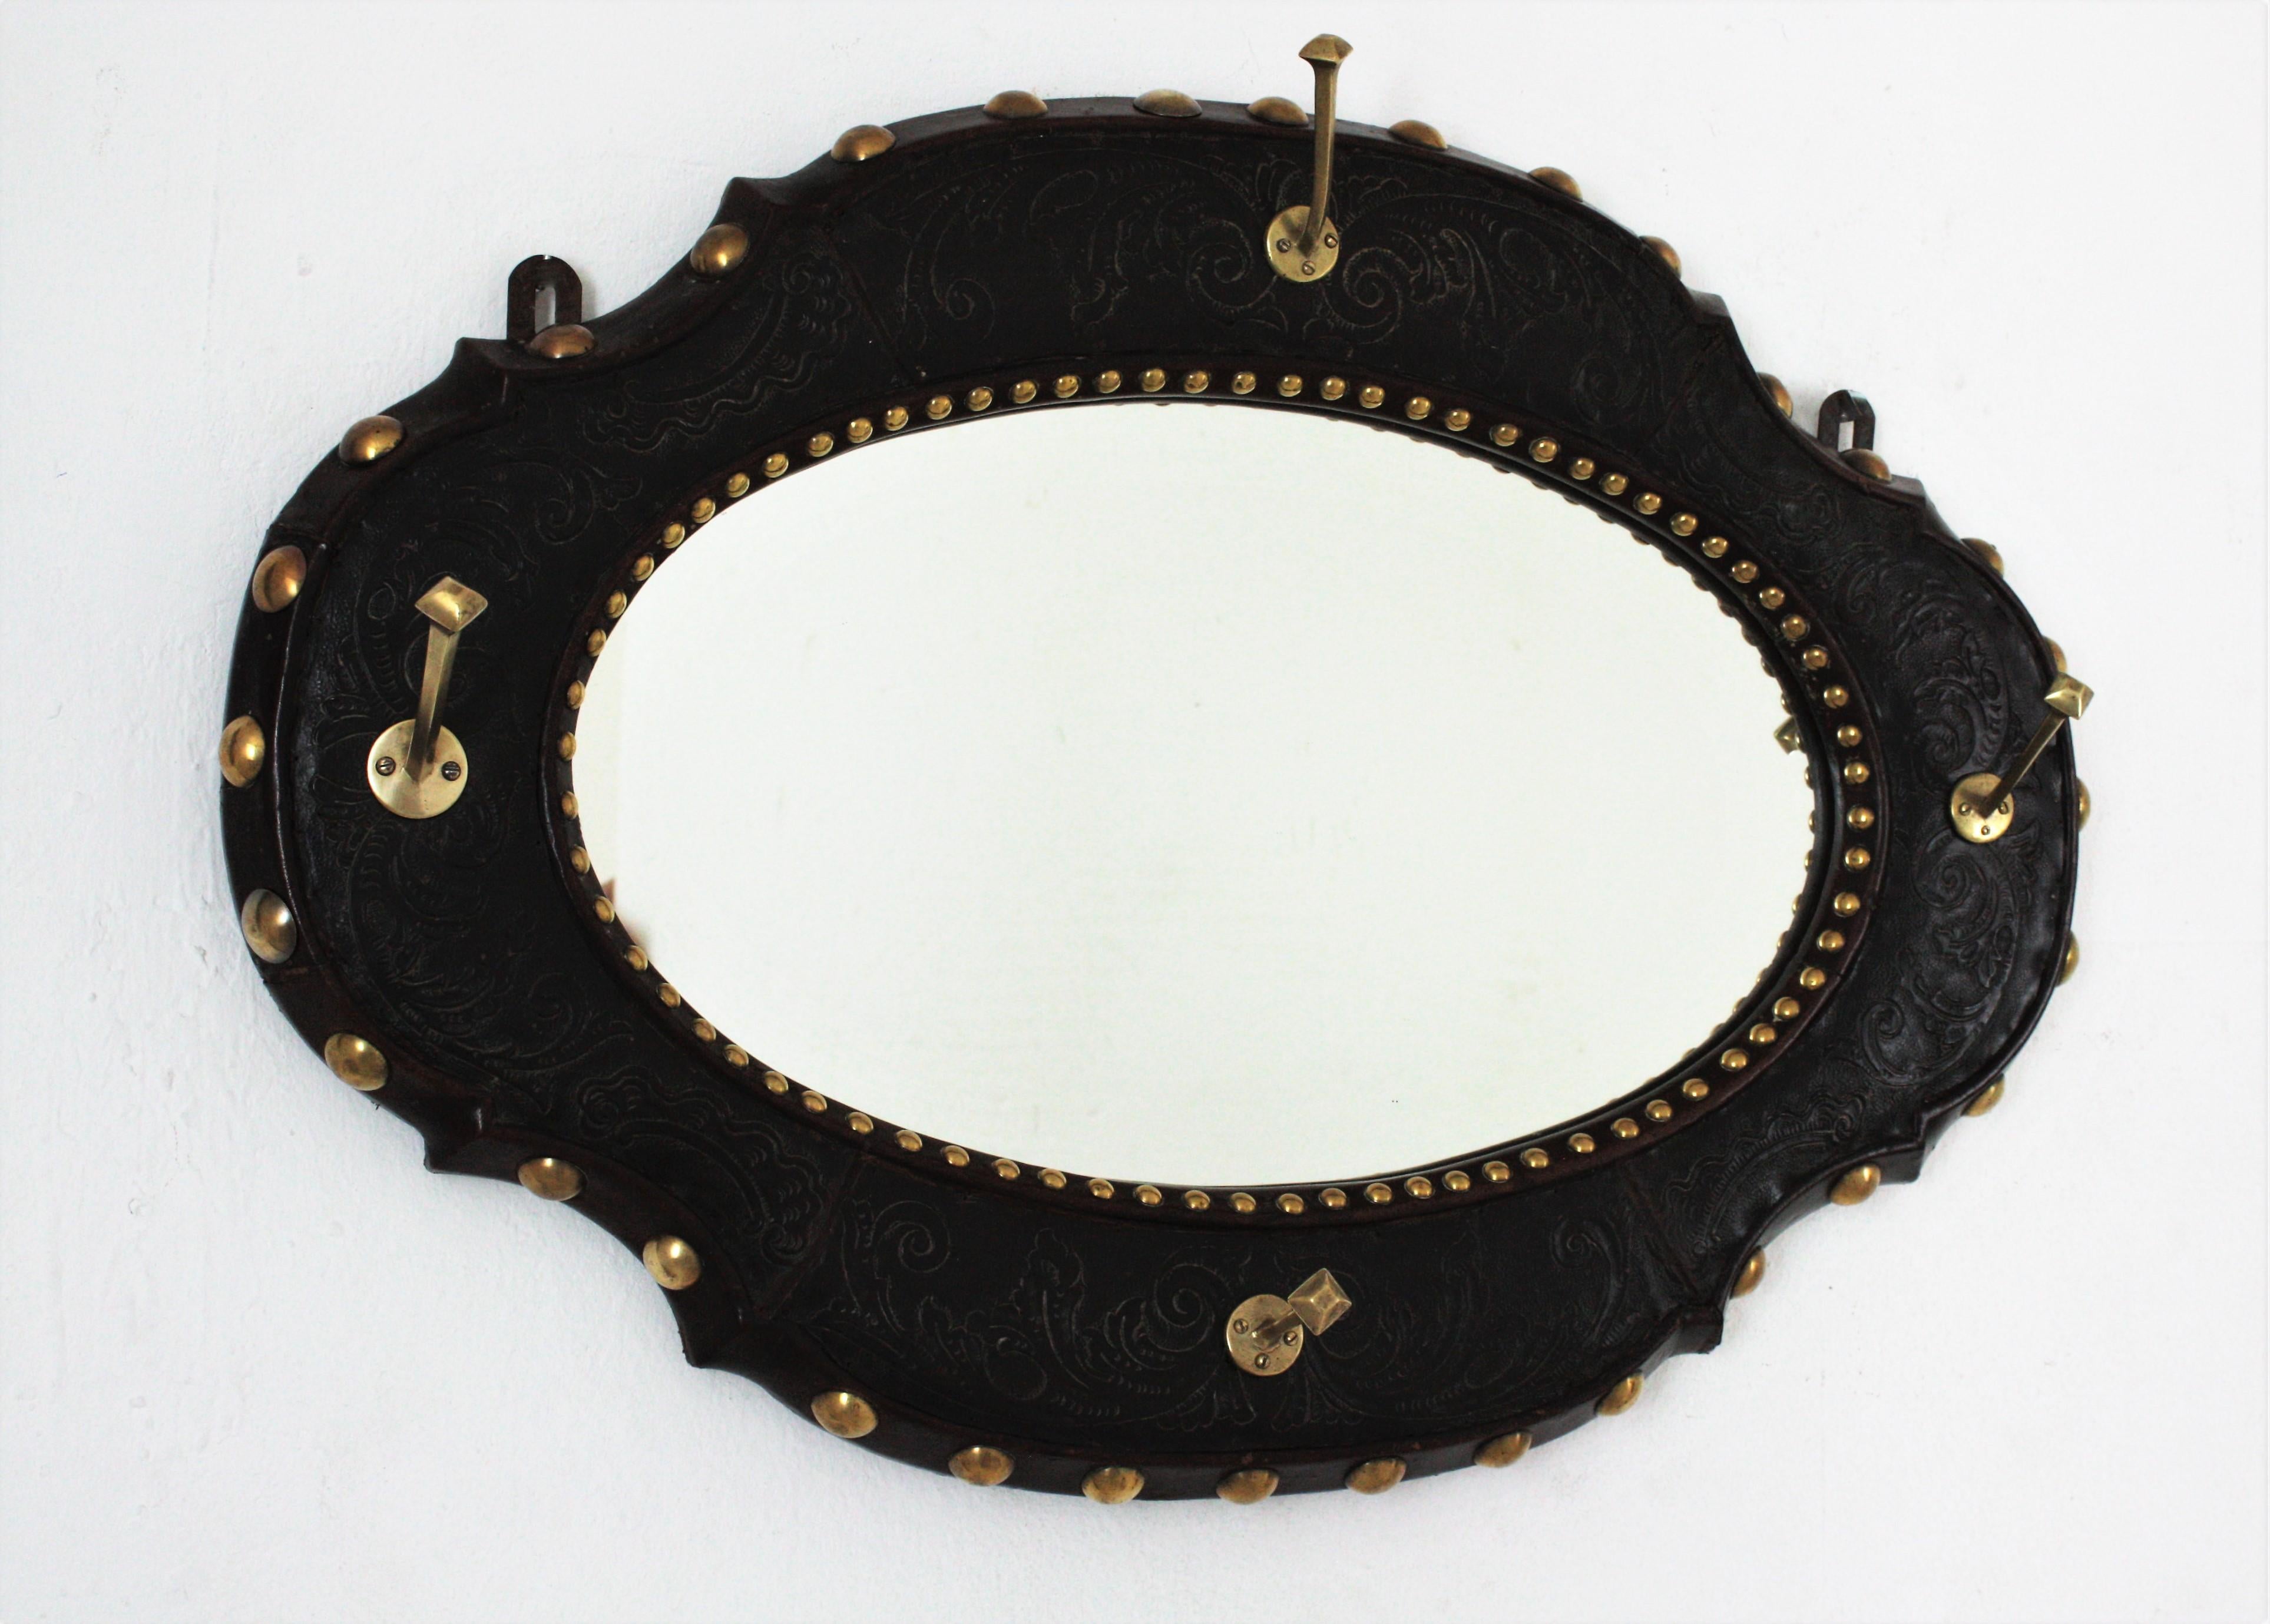 Elegant Spanish Colonial style wall mirror with coat hangers in leather repoussé and brass. Spain, 1940s.
This piece features an oval beveled mirror with a leather repoussé frame with foliage decorations and 4 brass coat 
hangers. 
Nicely